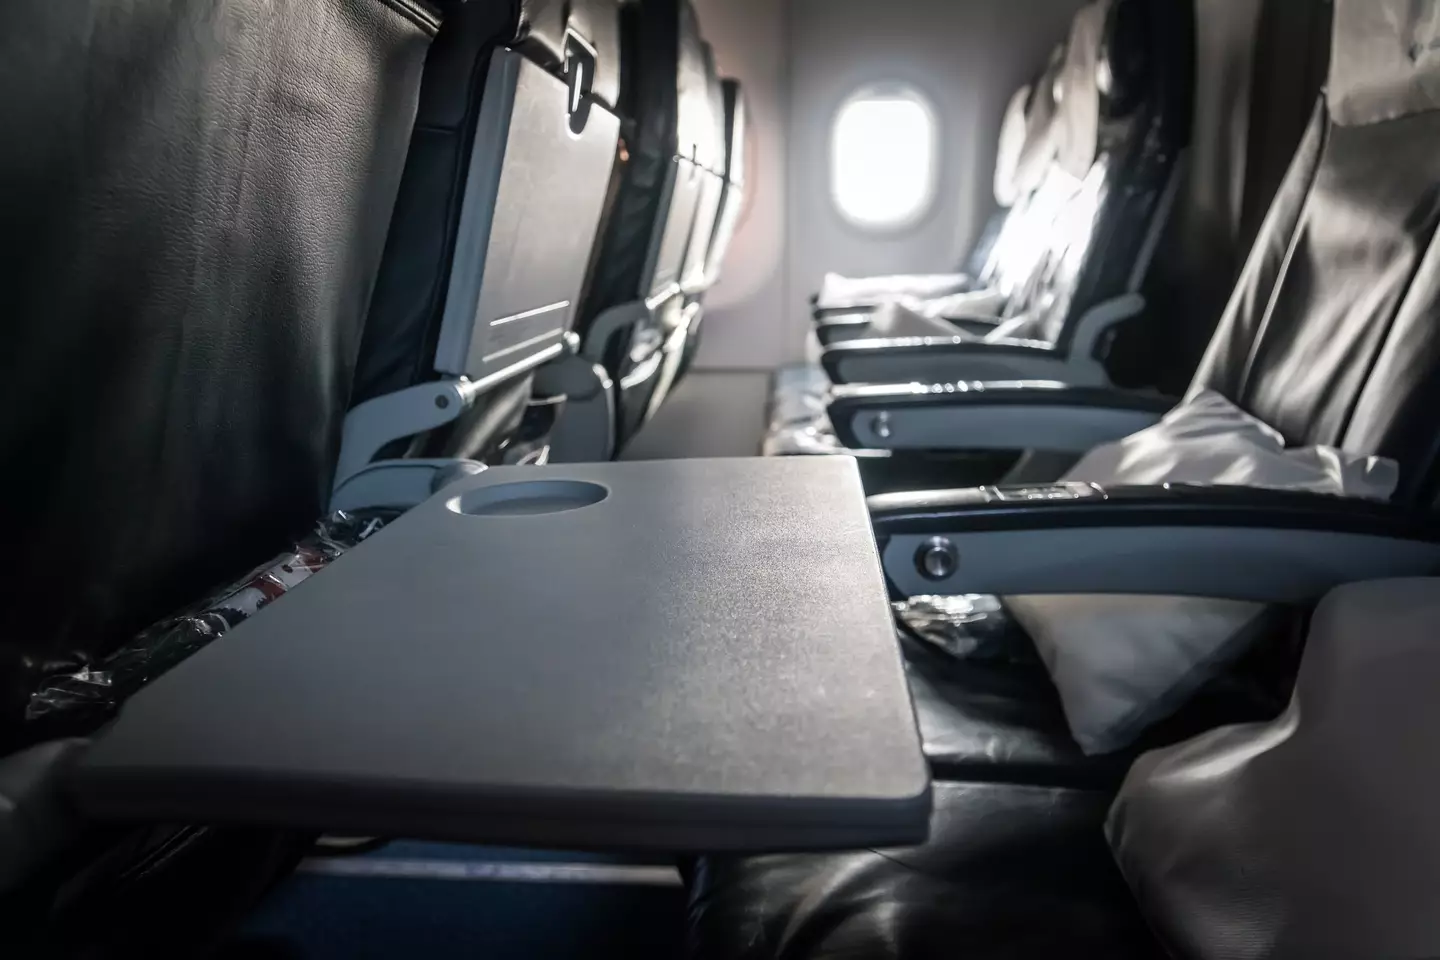 You may want to think twice when you next go to use a tray table when flying.